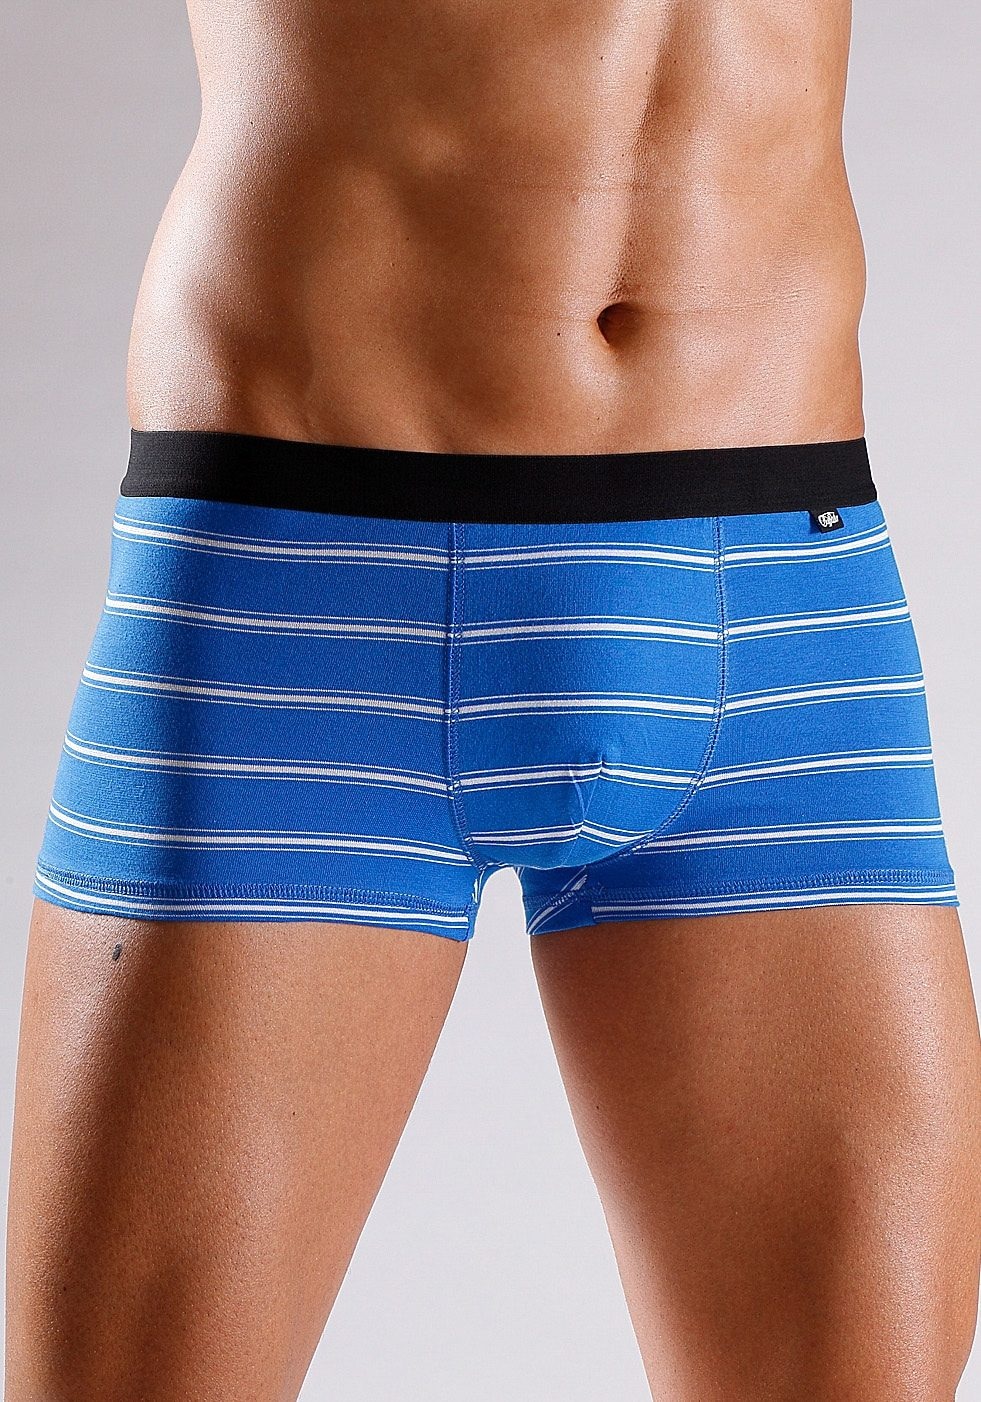 Buffalo Boxershorts, (Packung, 4 St.), in Hipster-Form mit elastischer Baumwolle, Â»Cotton made in AfricaÂ«